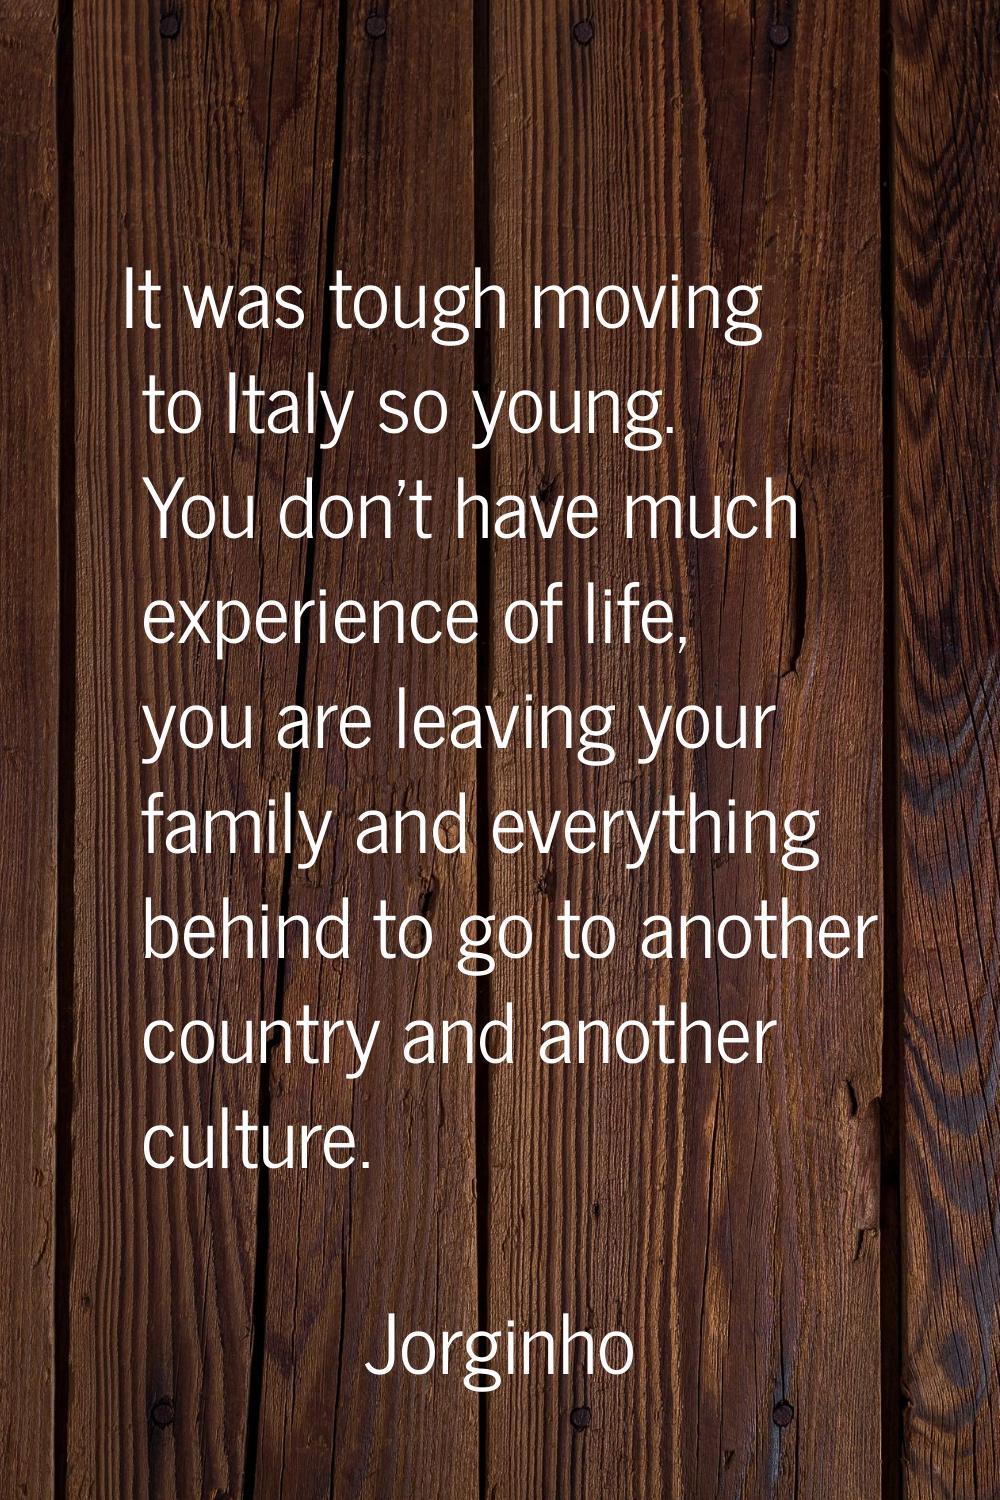 It was tough moving to Italy so young. You don't have much experience of life, you are leaving your